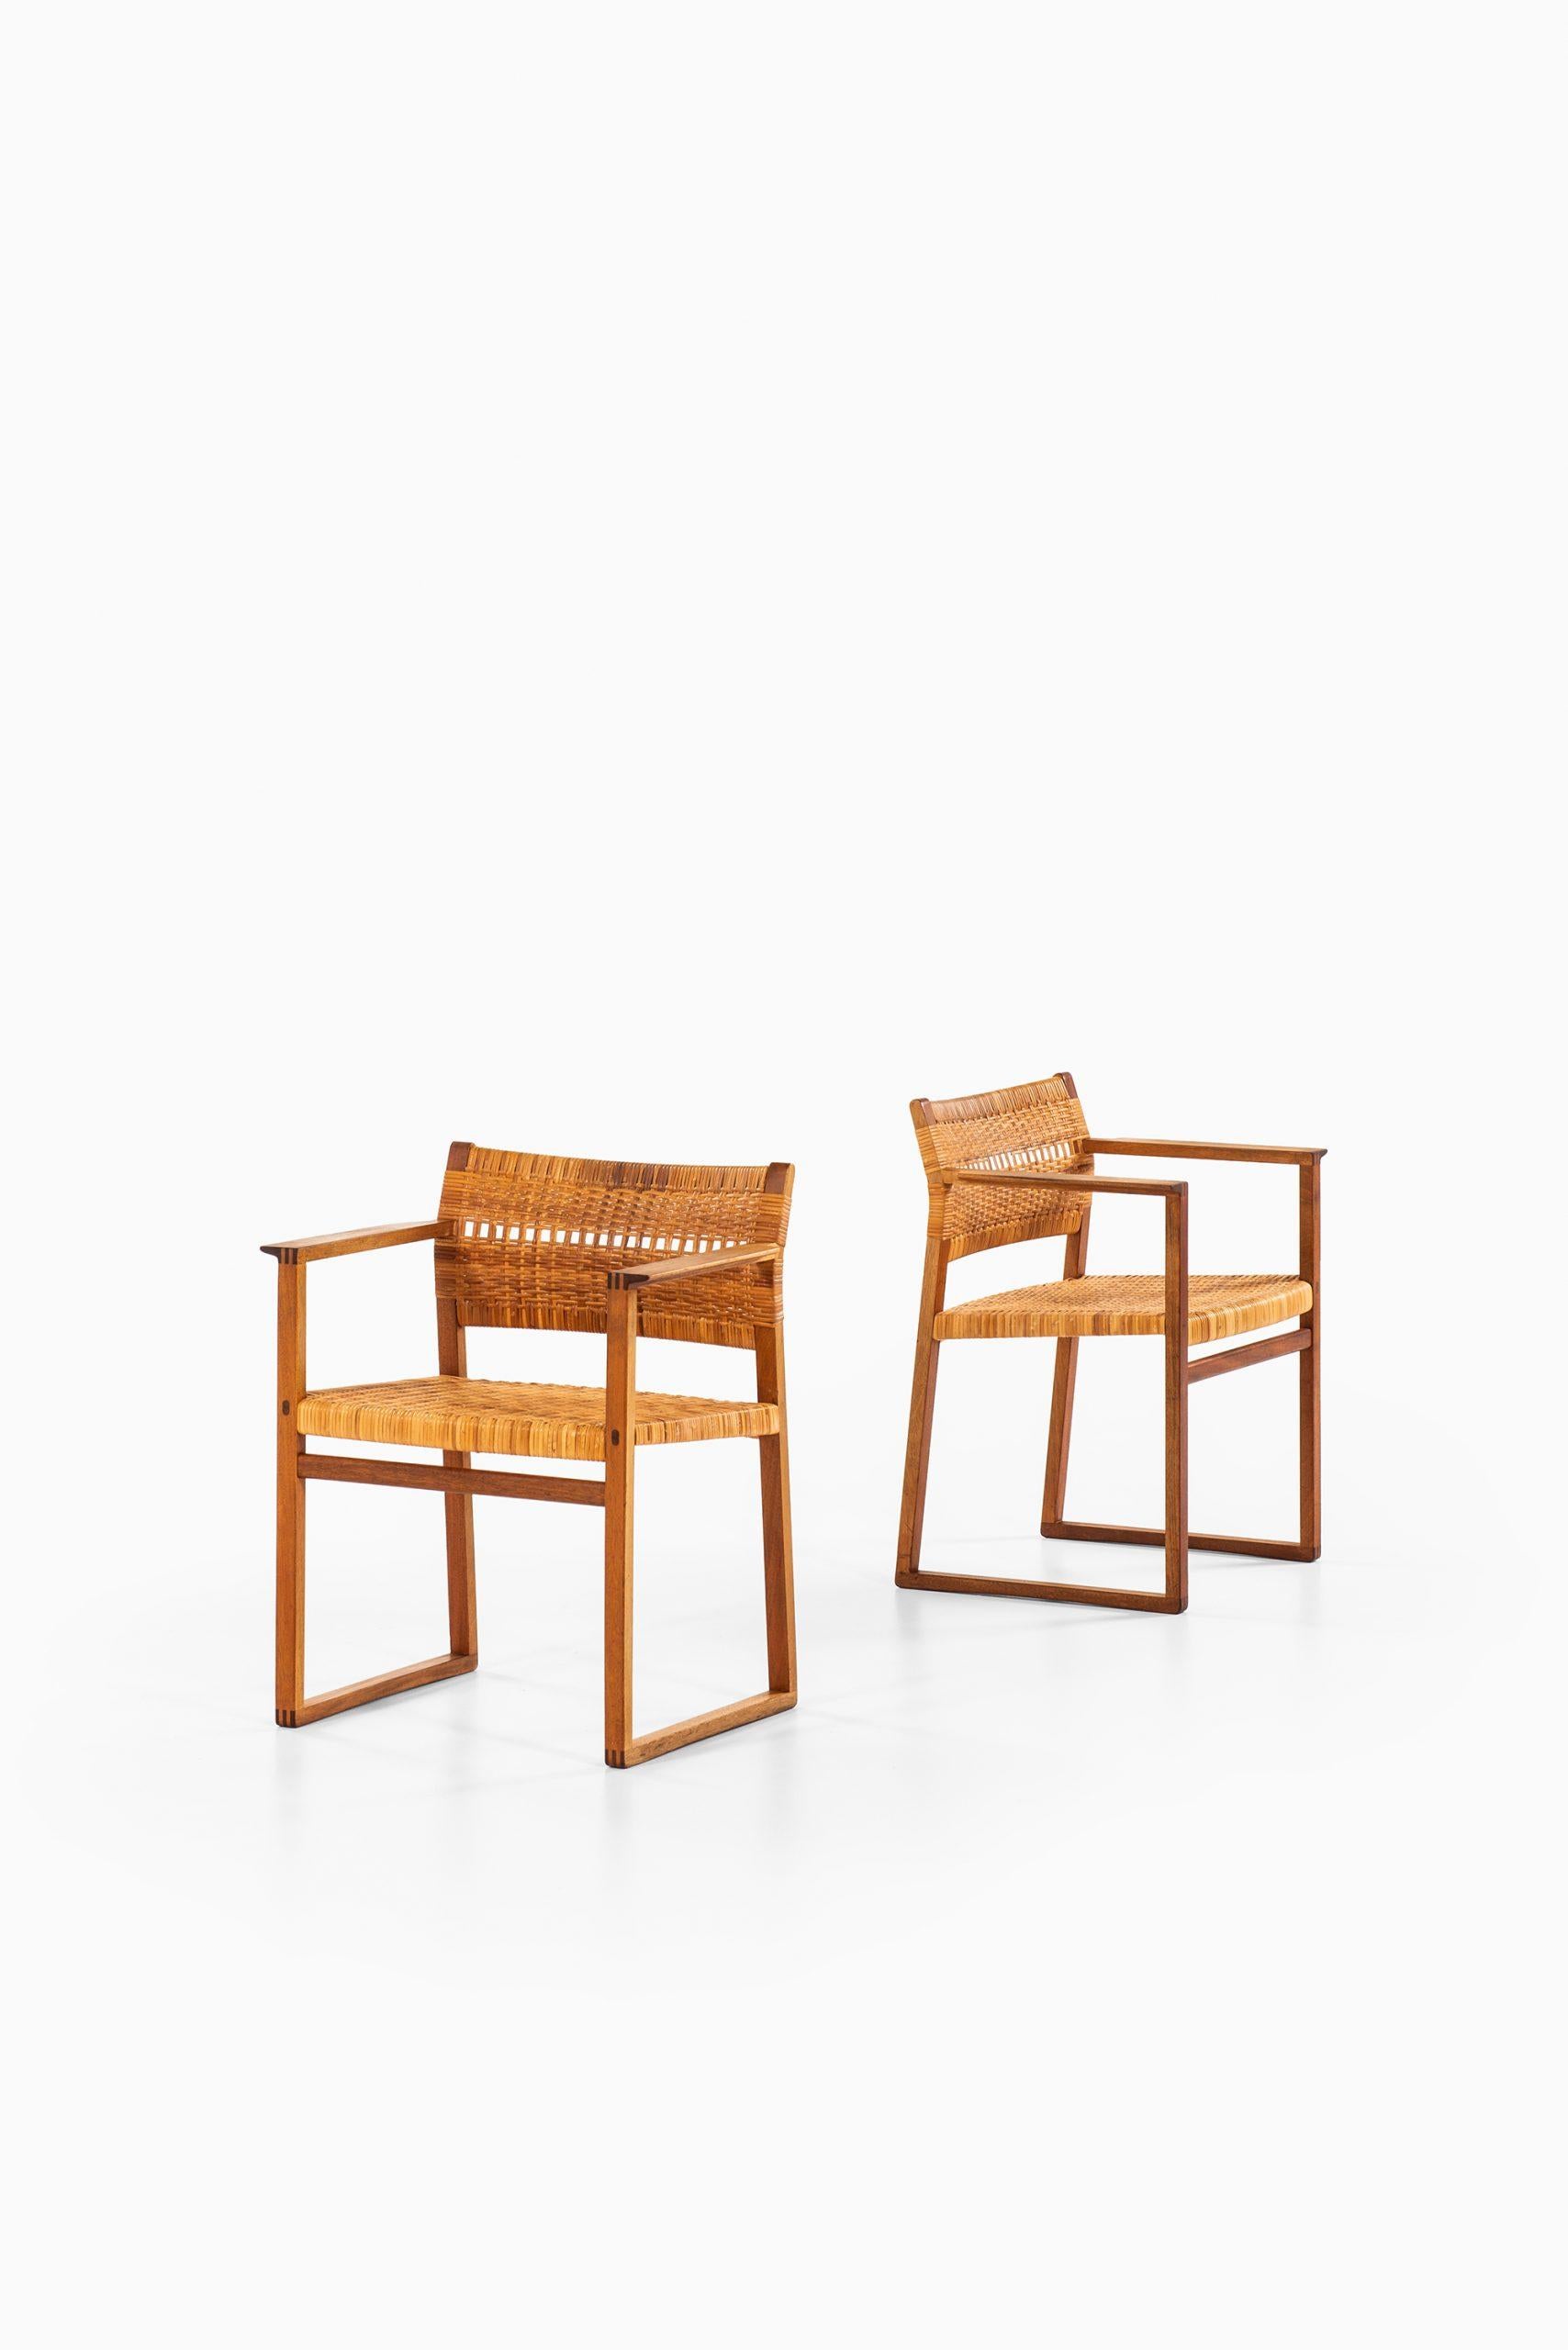 Rare pair of armchairs model BM-62 designed by Børge Mogensen. Produced by Fredericia Stolefabrik in Denmark.